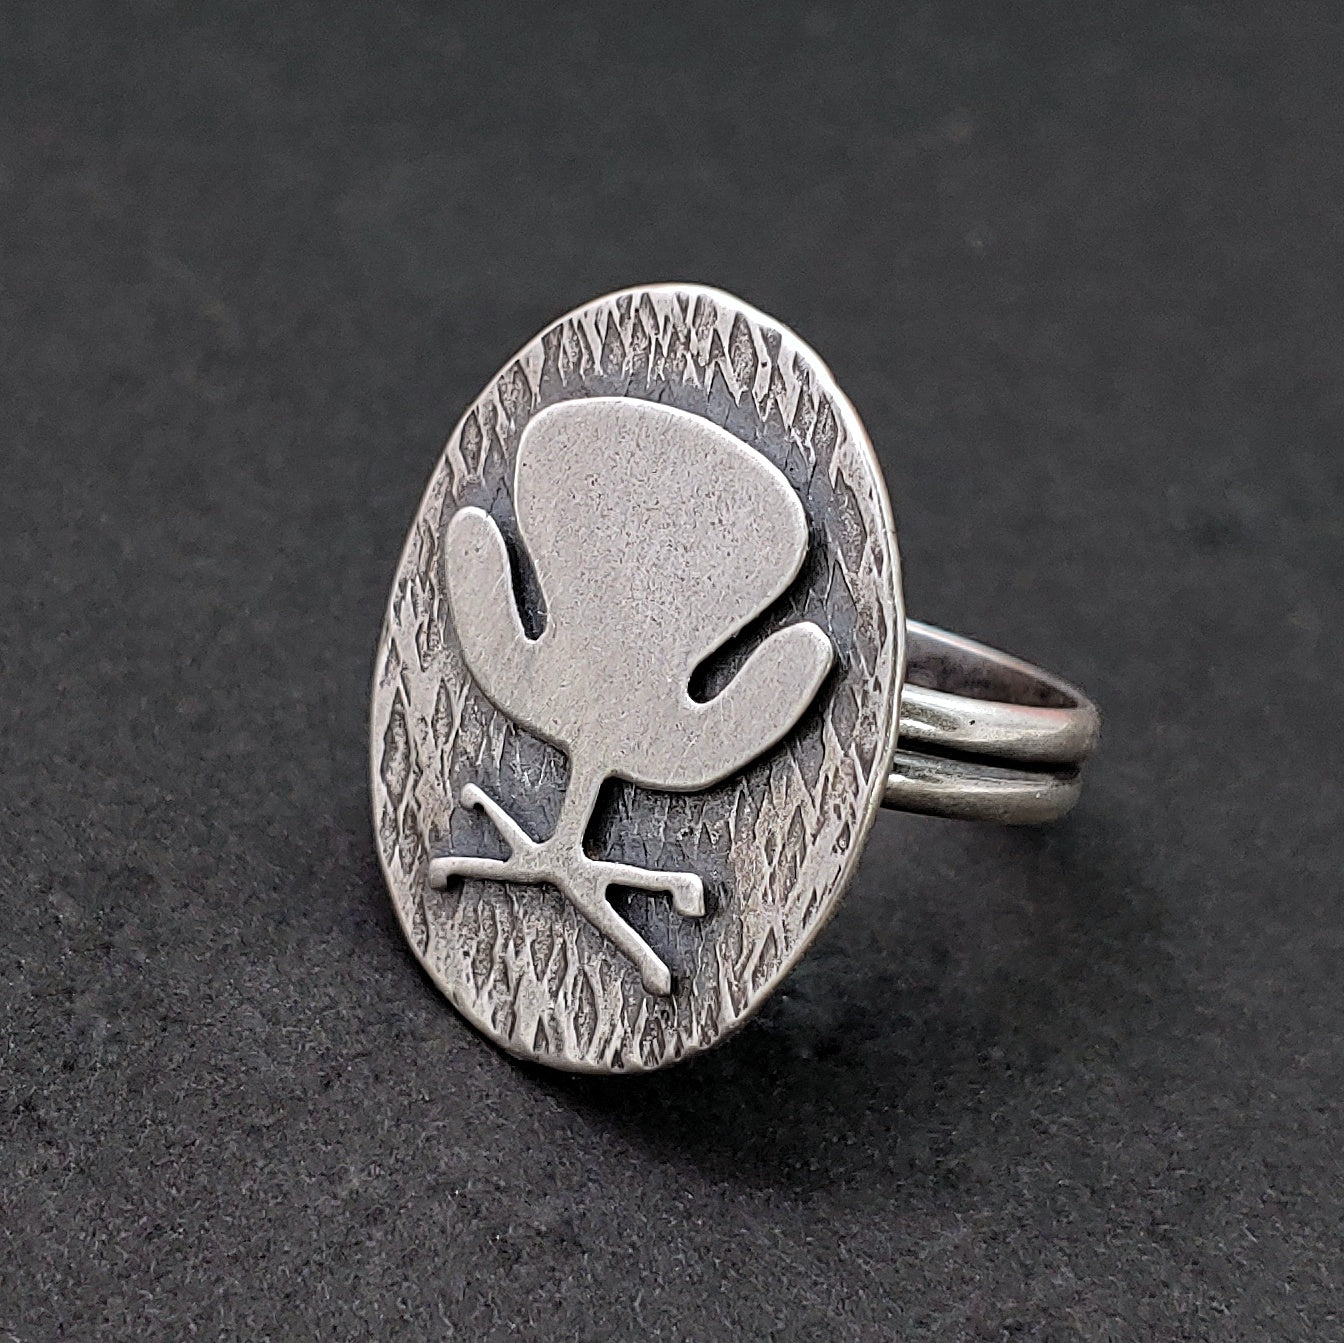 Swan chair ring in sterling silver